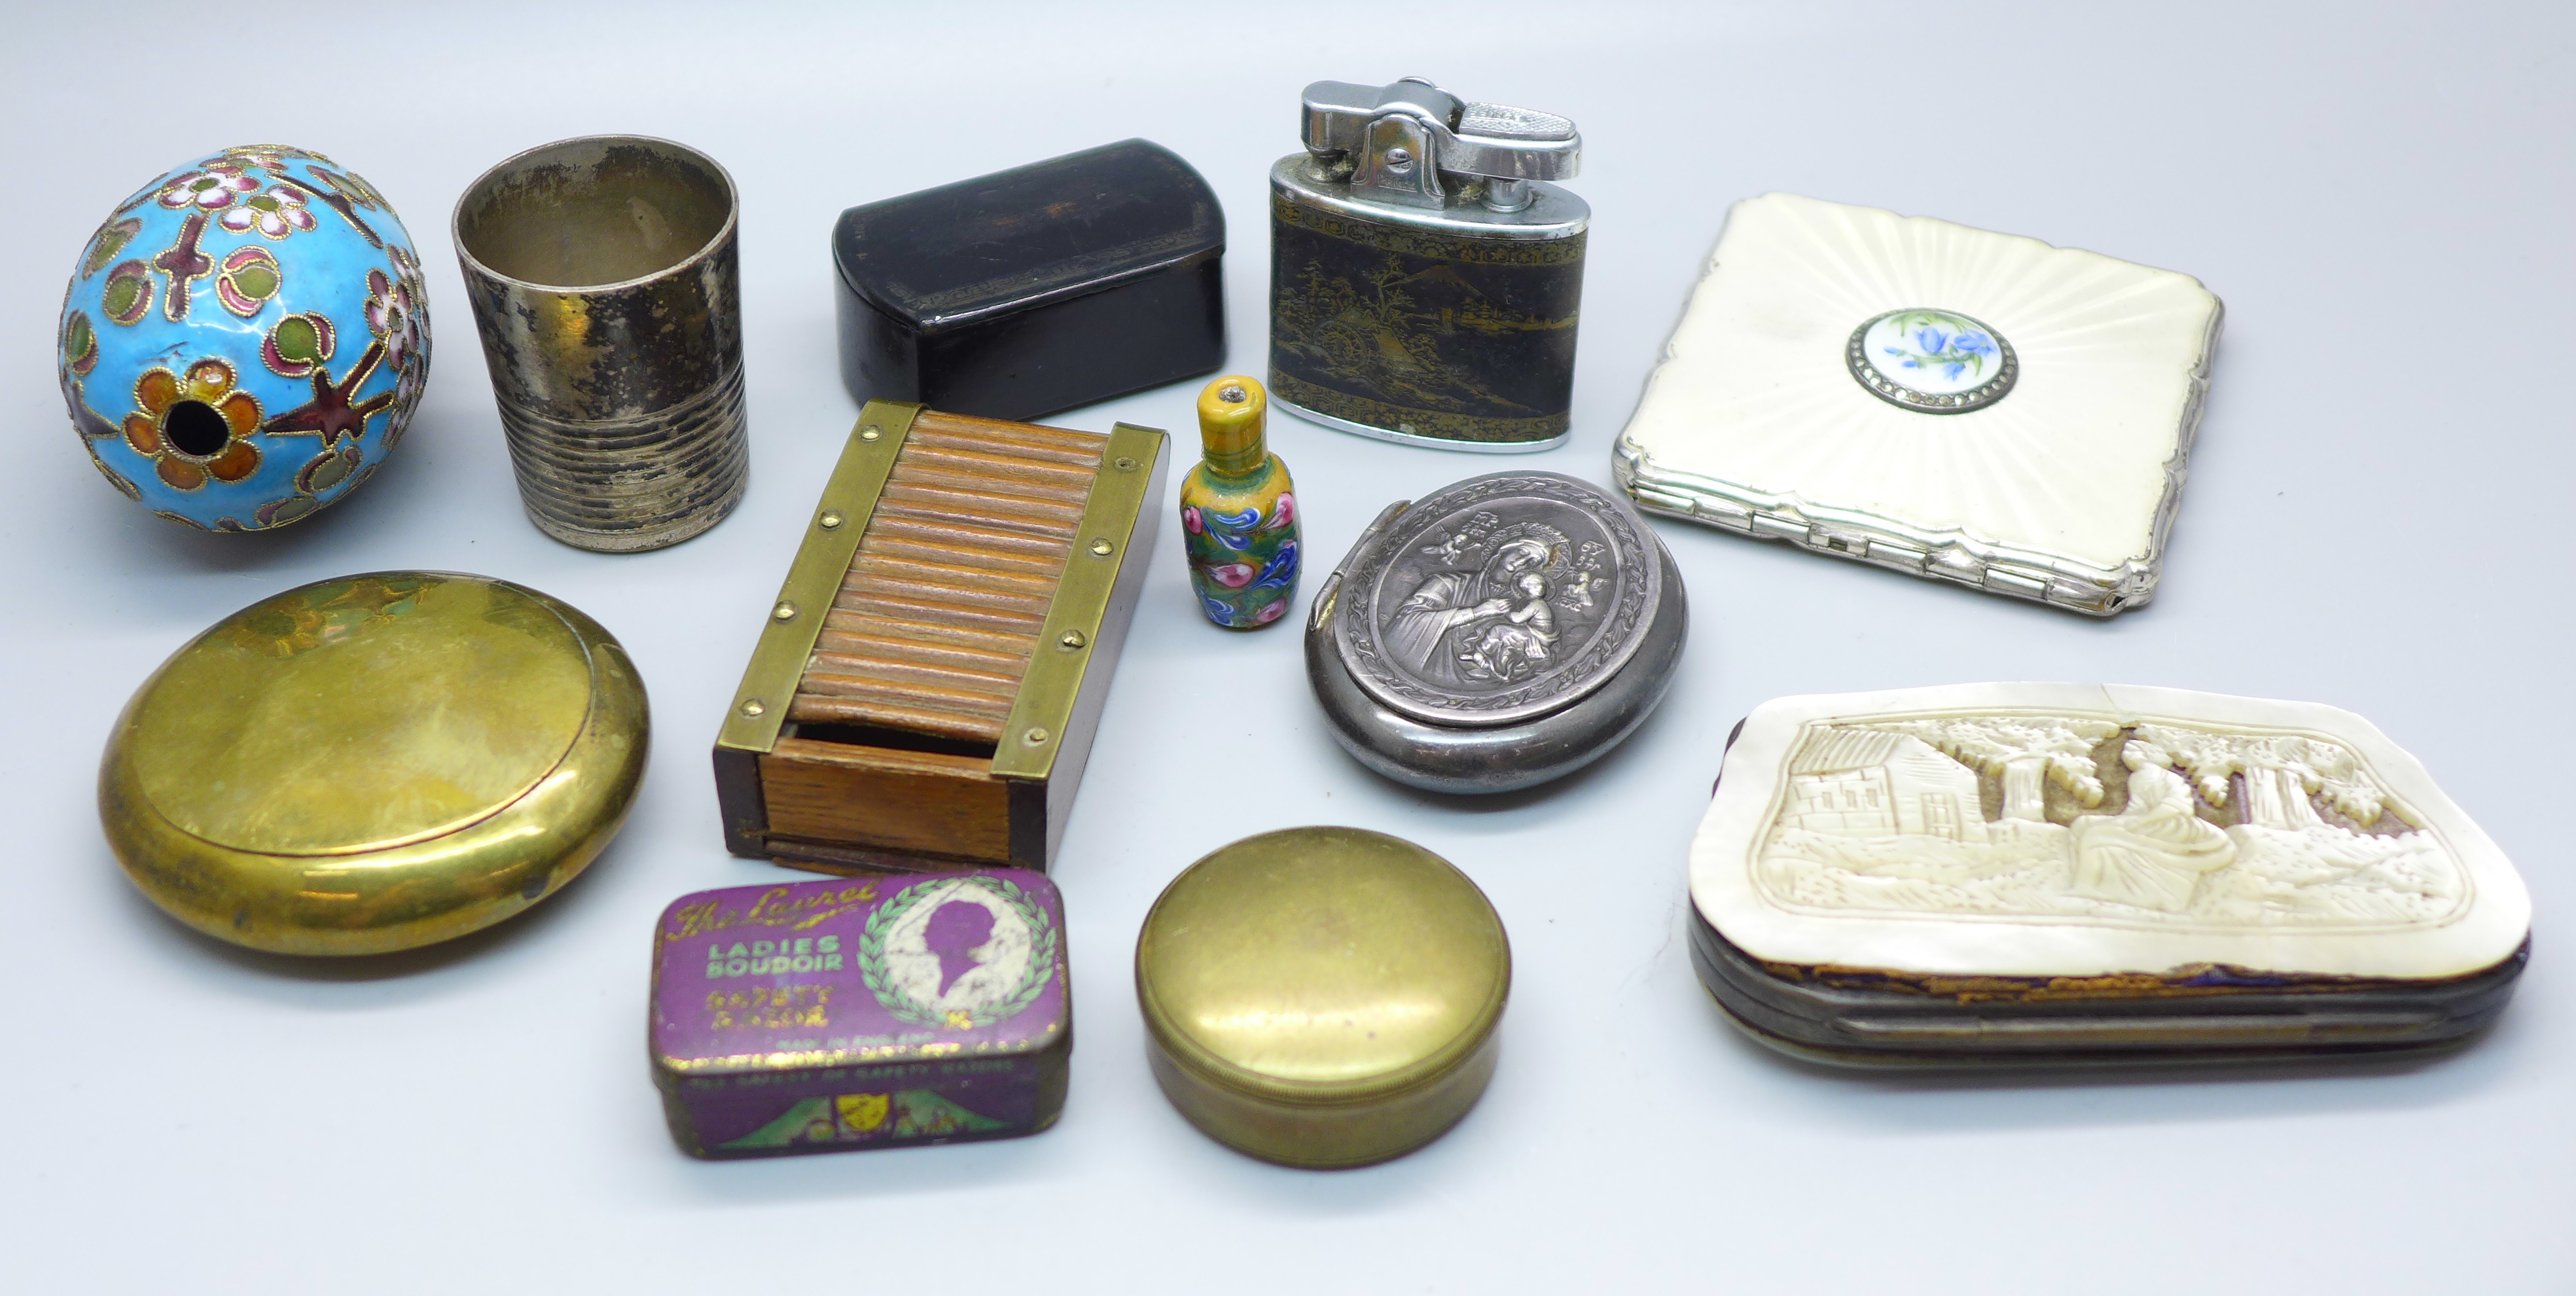 A guilloche enamel Stratton compact, pill boxes, a mother of pearl purse, etc.